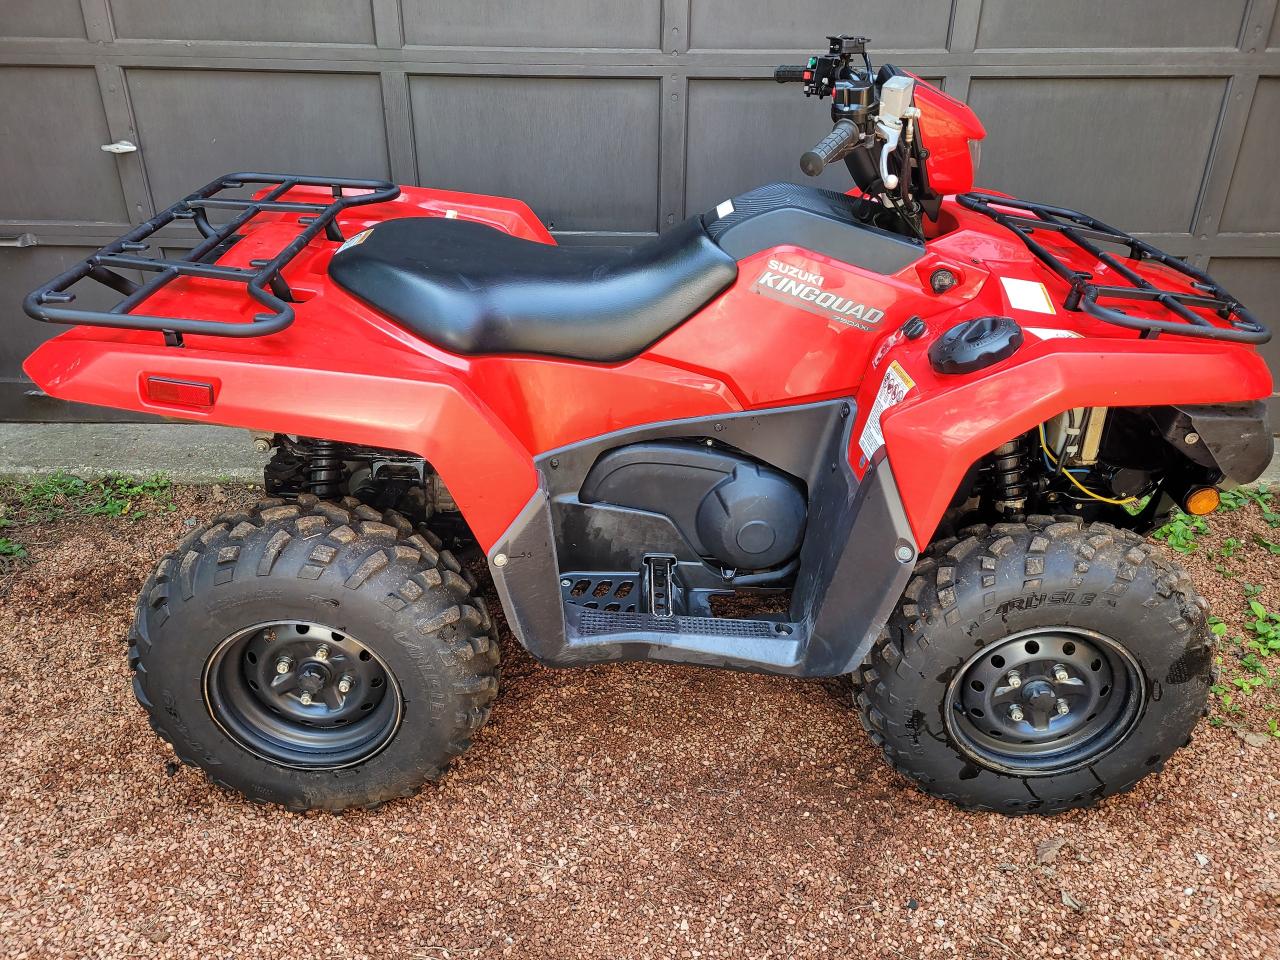 2022 Suzuki KingQuad 750AXi  4x4 1-Owner Financing Available Trade-ins Welcome! - Photo #5